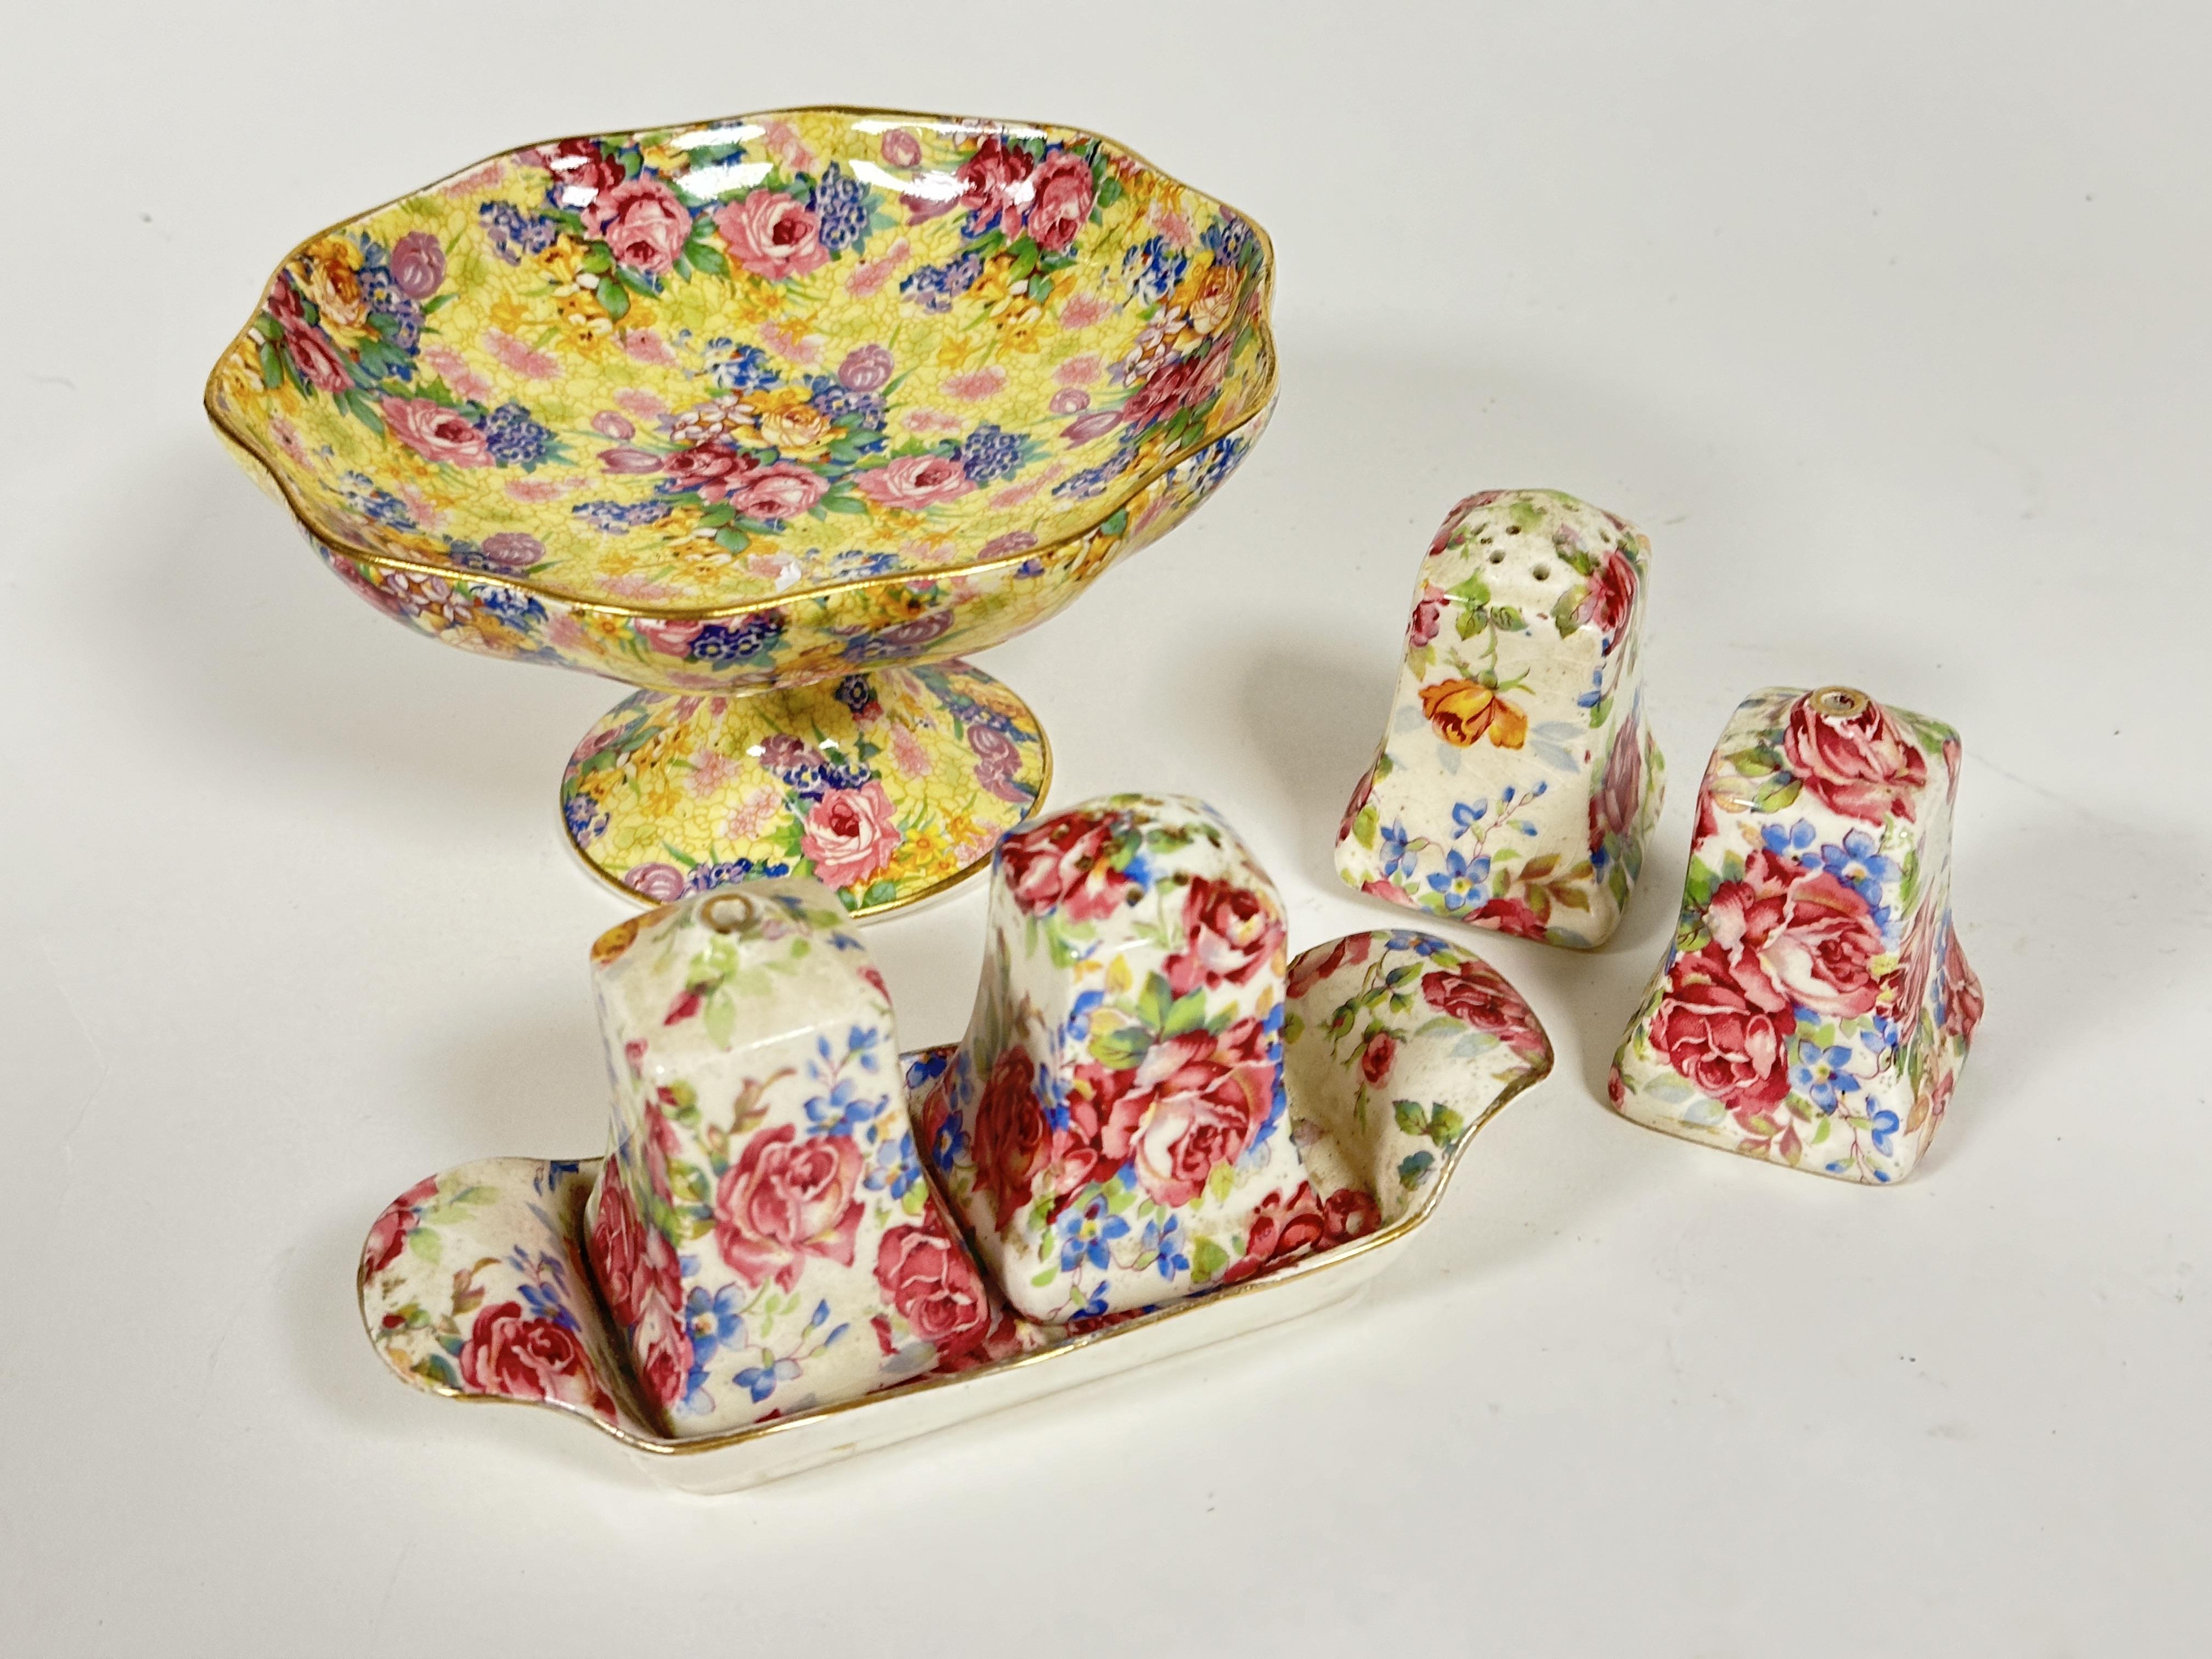 A Royal Winton Welbeck pattern Chintz ware comport shows no signs of damage or repairs H x 8.5cm D